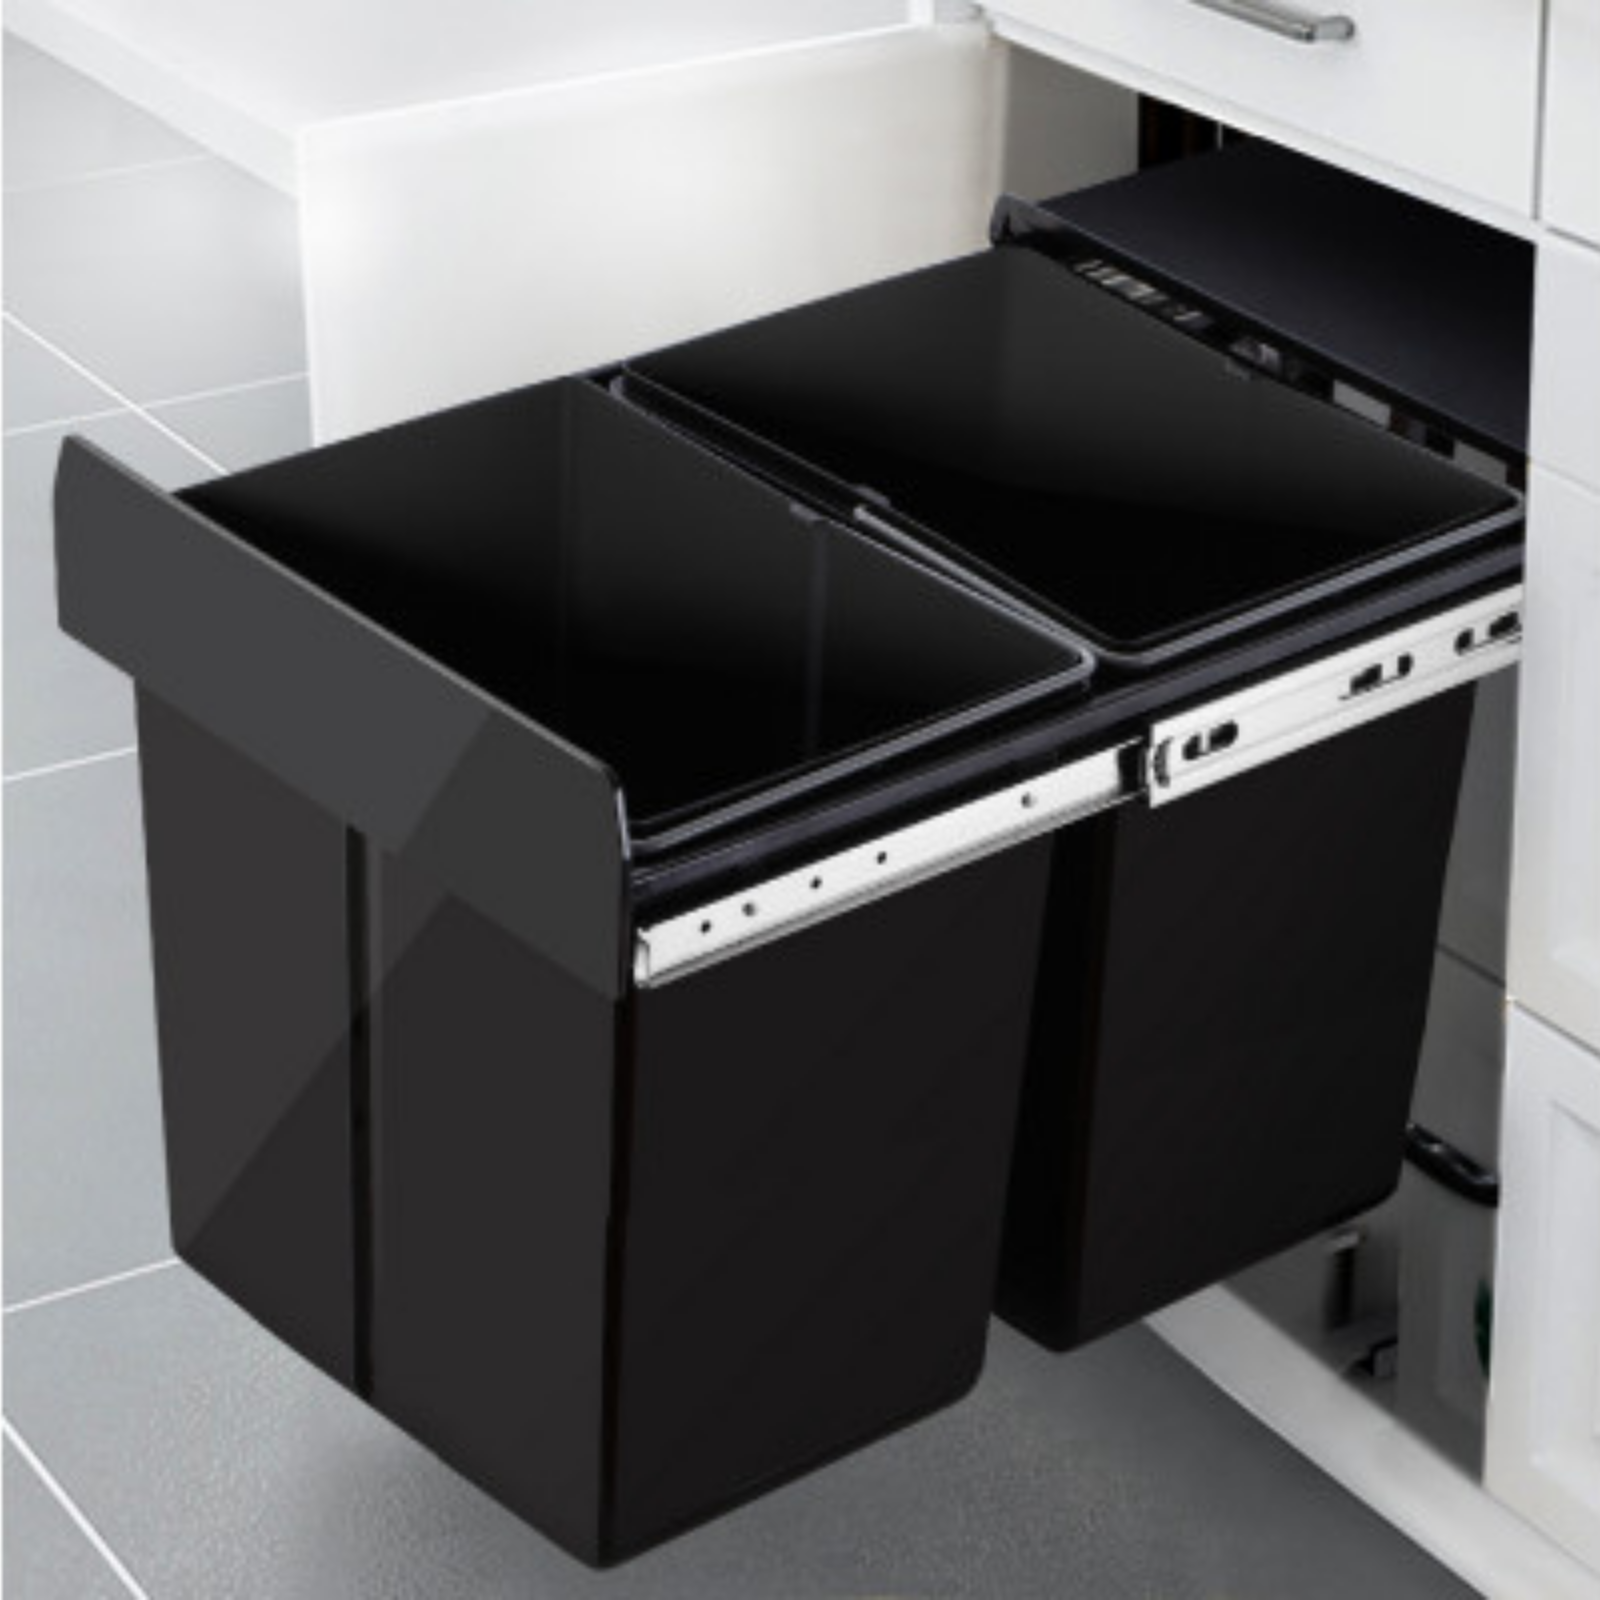 Cefito Dual Side Pull Out Bin will conceal inside your kitchen cabinet perfectly